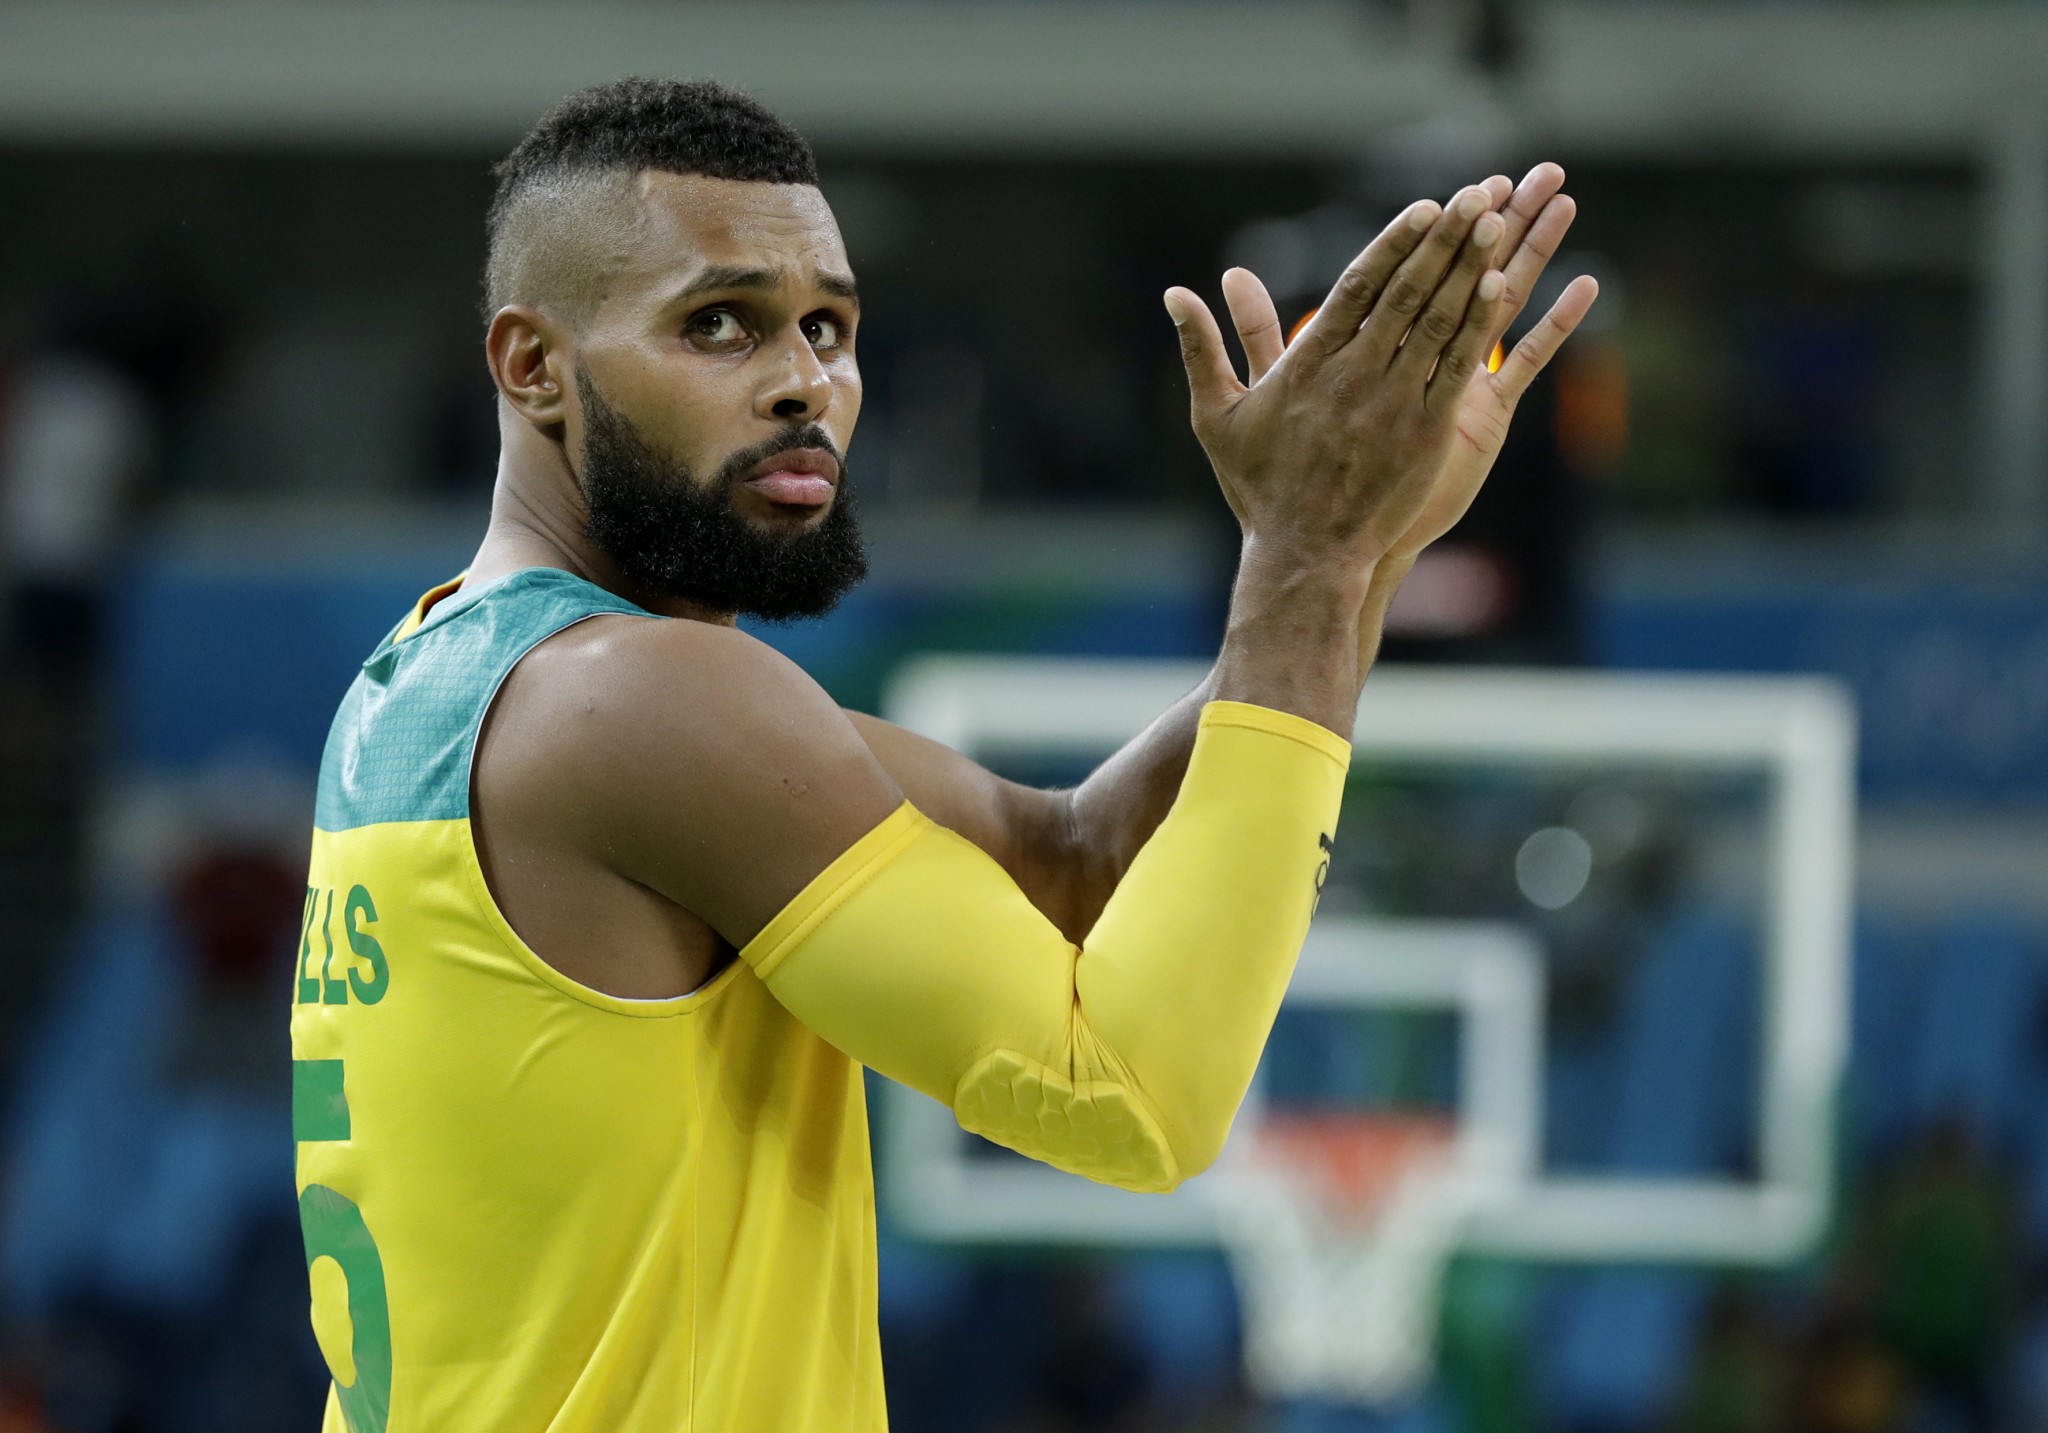 Patty Mills and the rest of the Australian men's national basketball team earned a round of applause with another stellar effort to beat Lithuania. (AP/Charlie Neibergall)